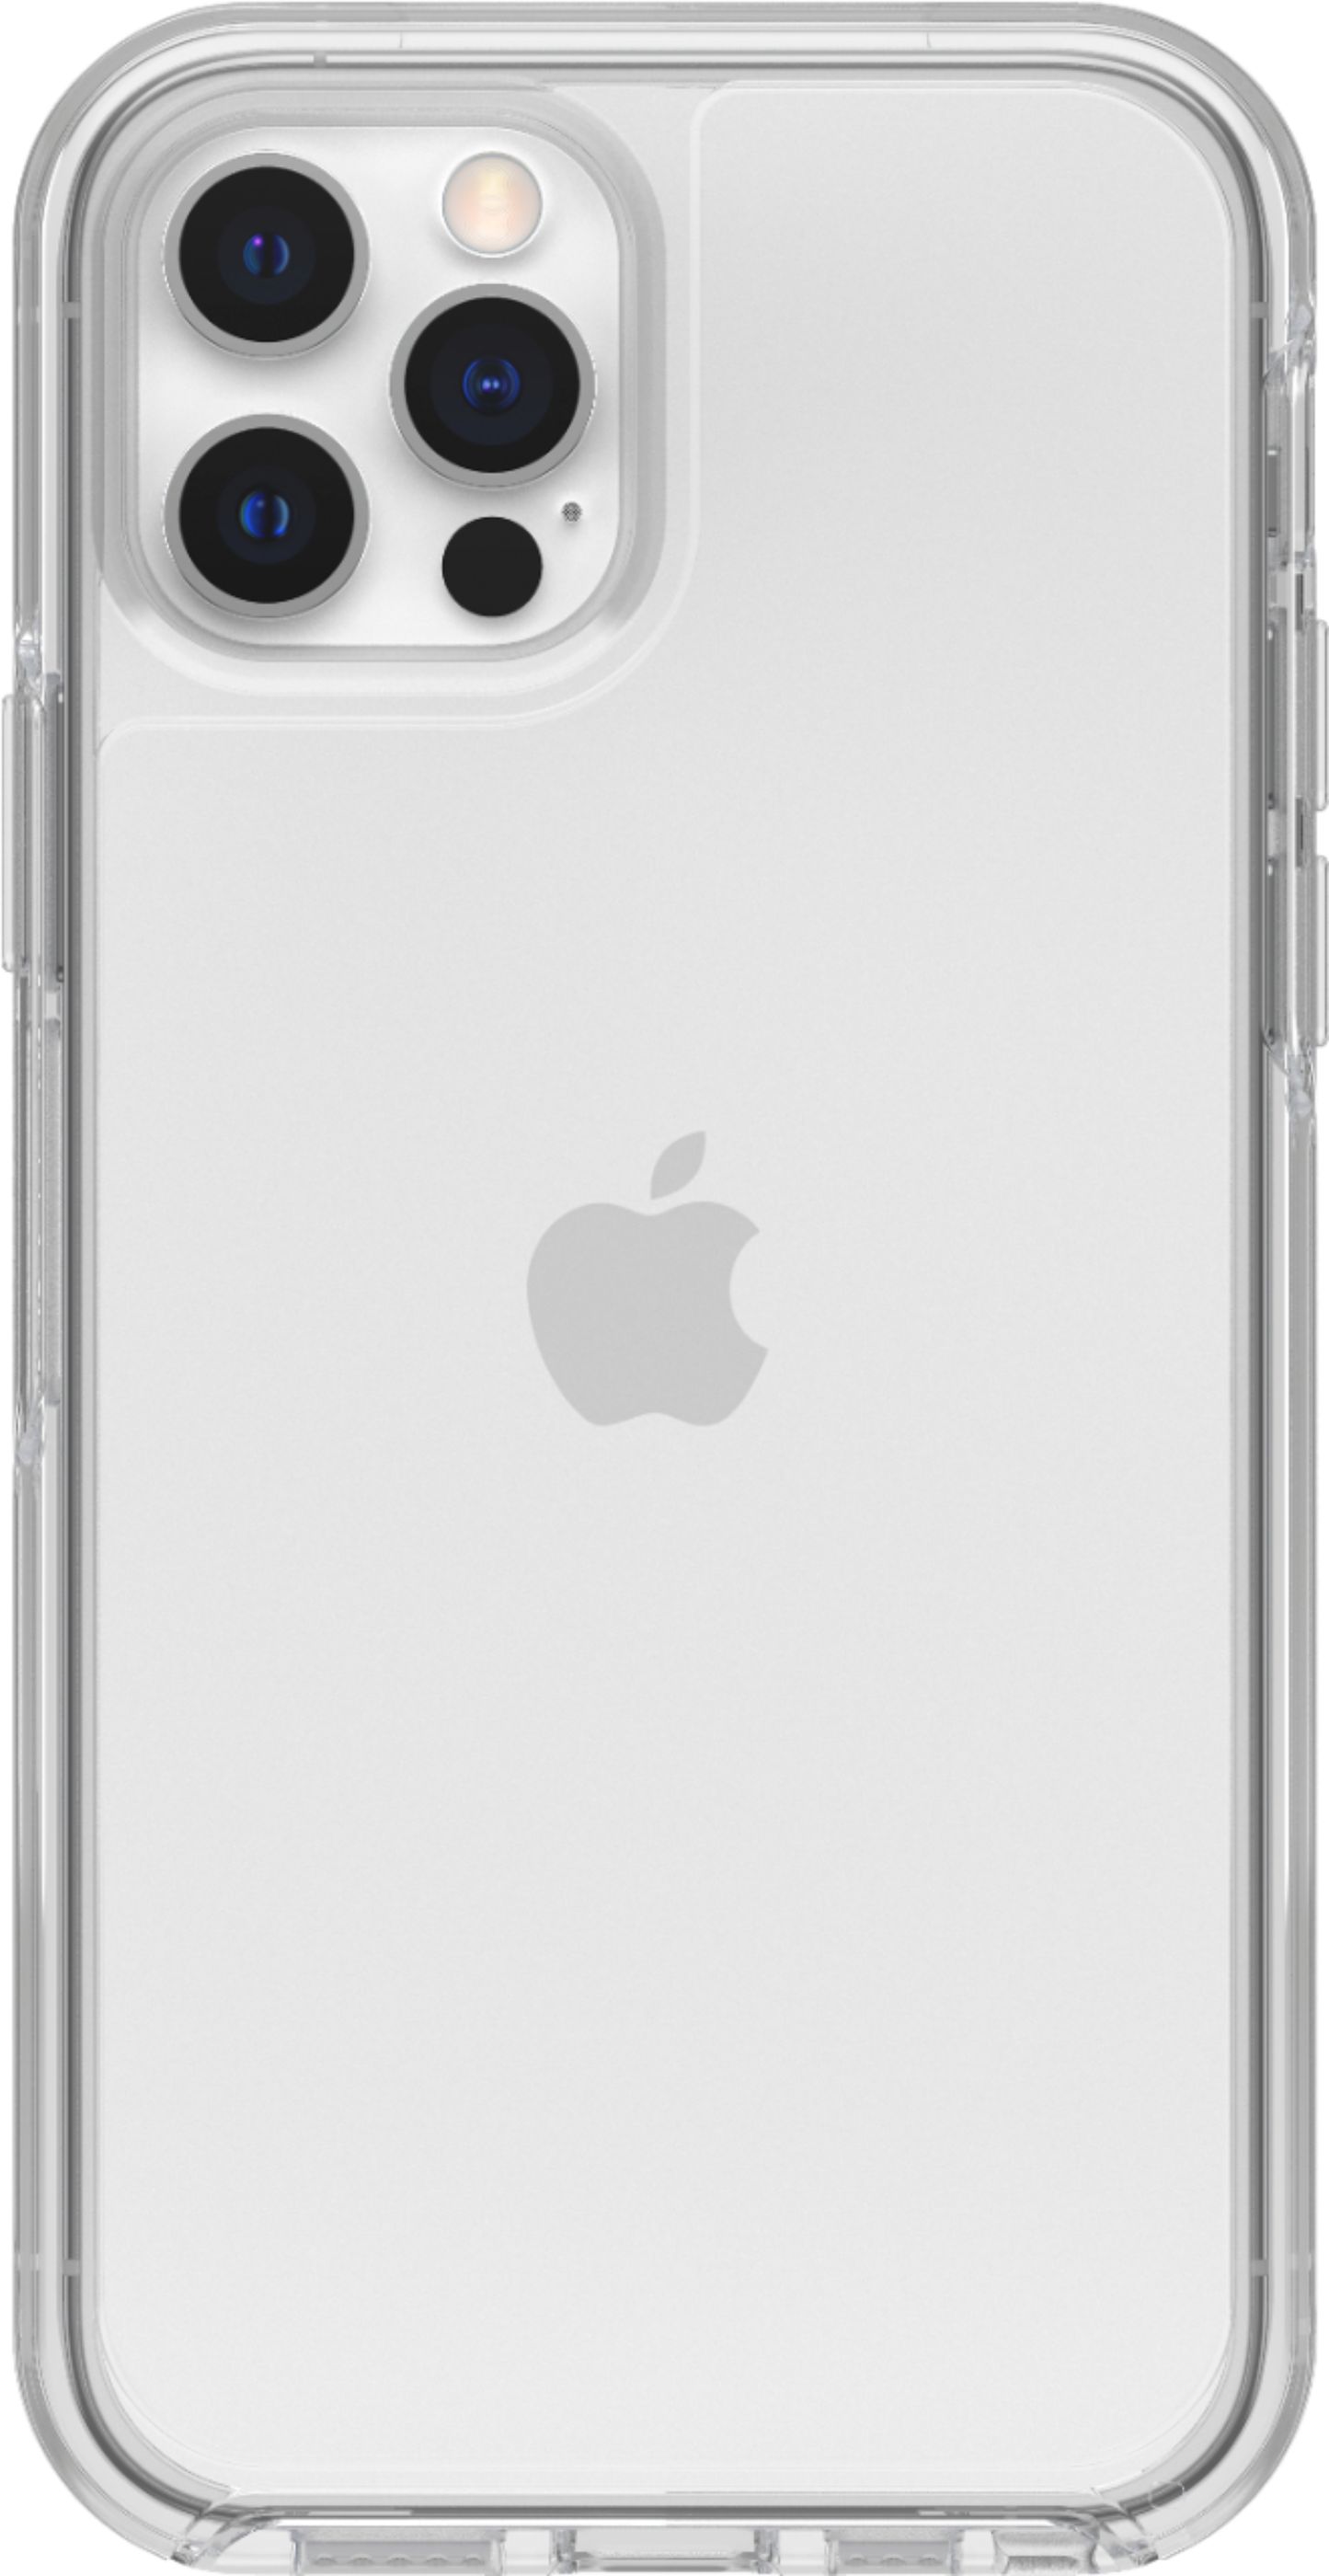 Angle View: OtterBox - Symmetry Clear Series for Apple iPhone 12 and iPhone 12 Pro - Clear